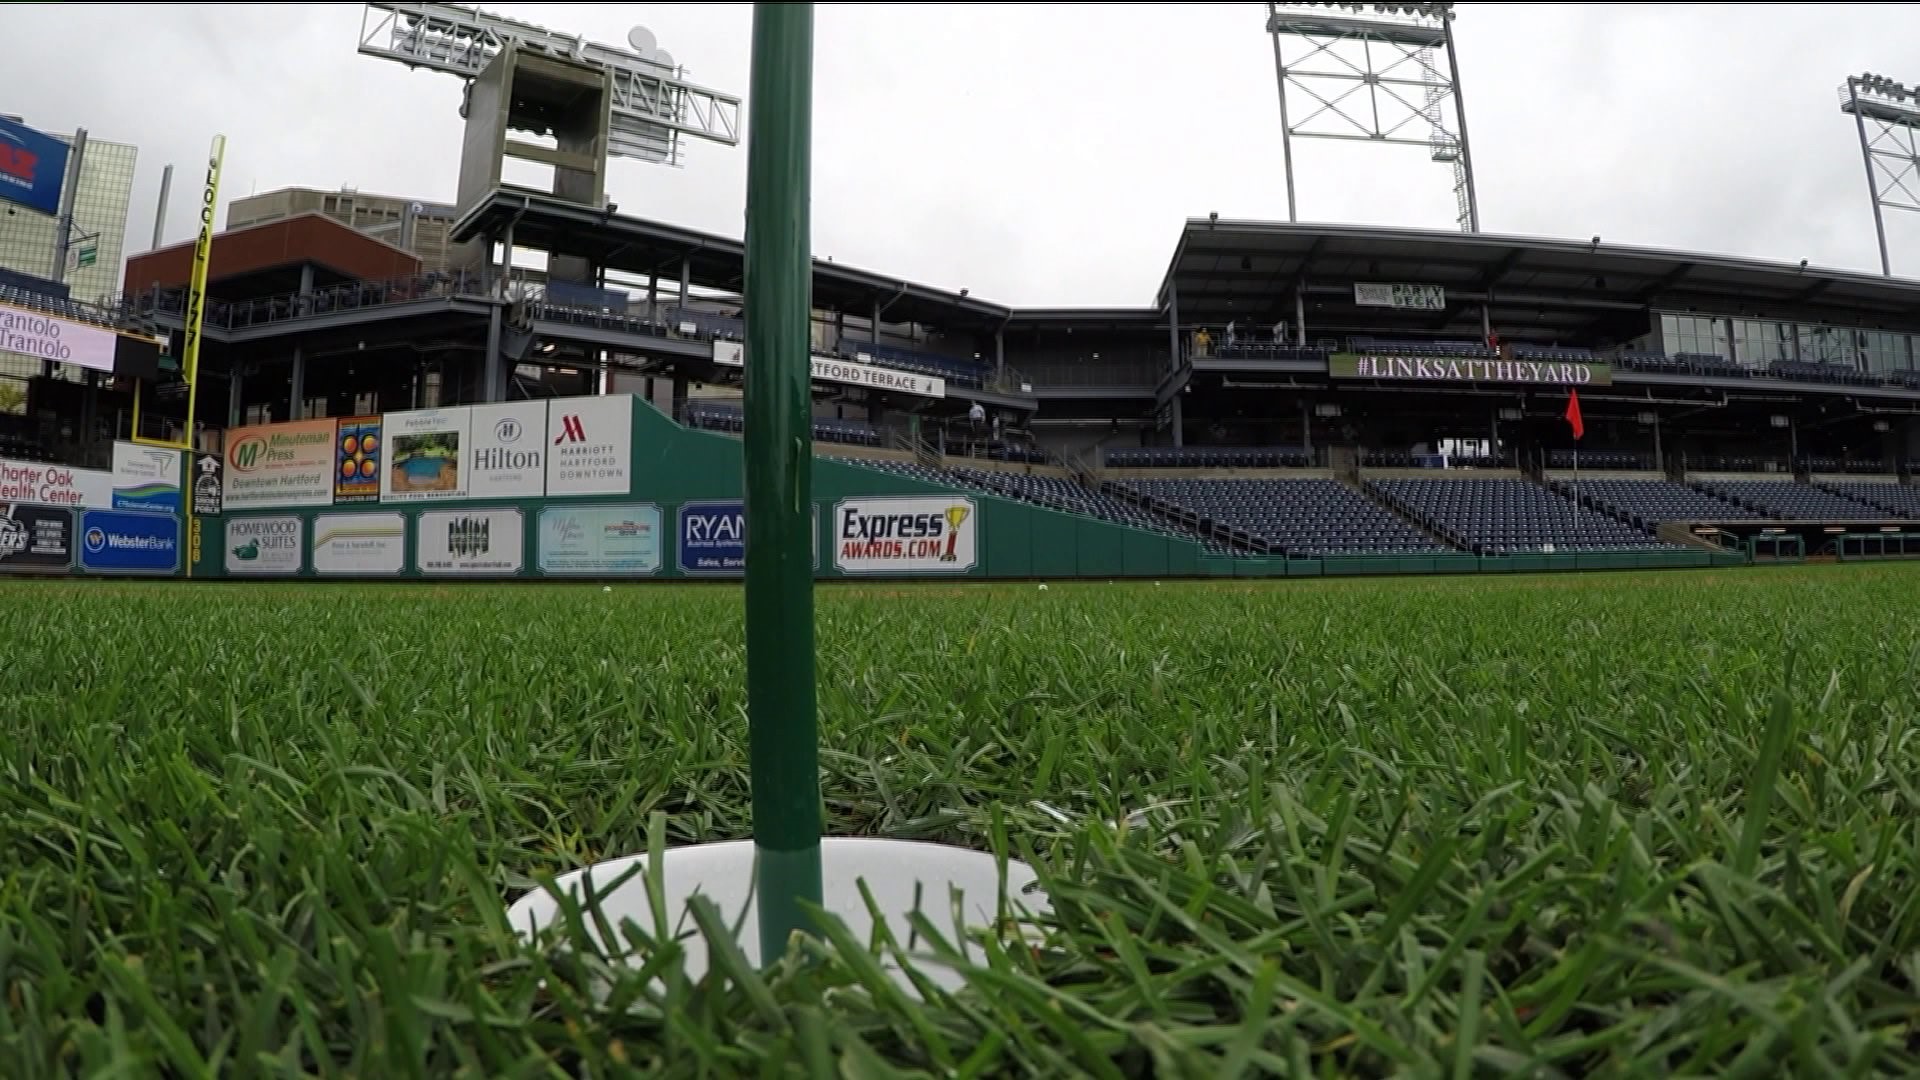 The Yard Goats go for golf